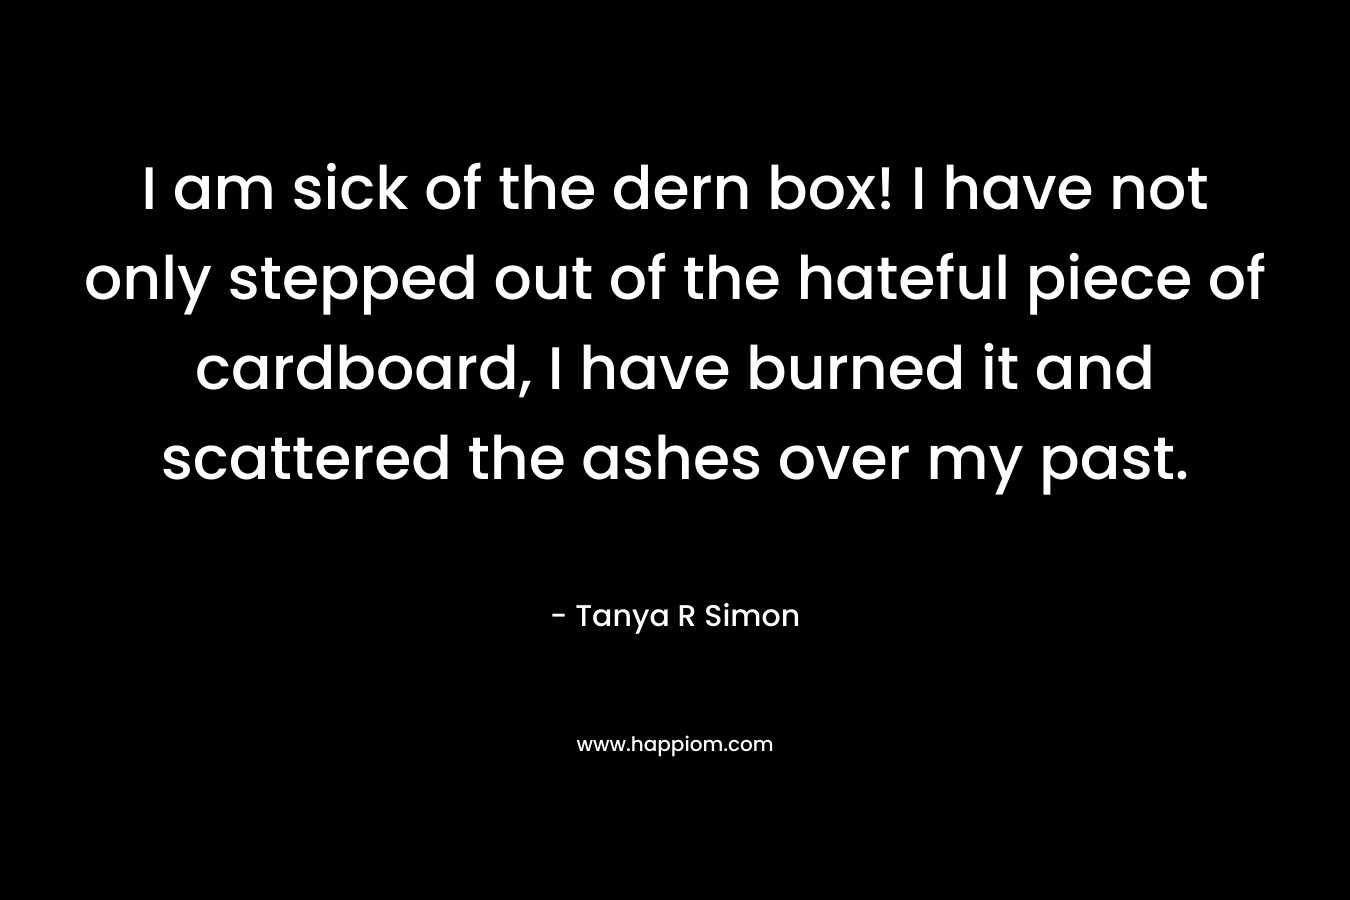 I am sick of the dern box! I have not only stepped out of the hateful piece of cardboard, I have burned it and scattered the ashes over my past. – Tanya R Simon